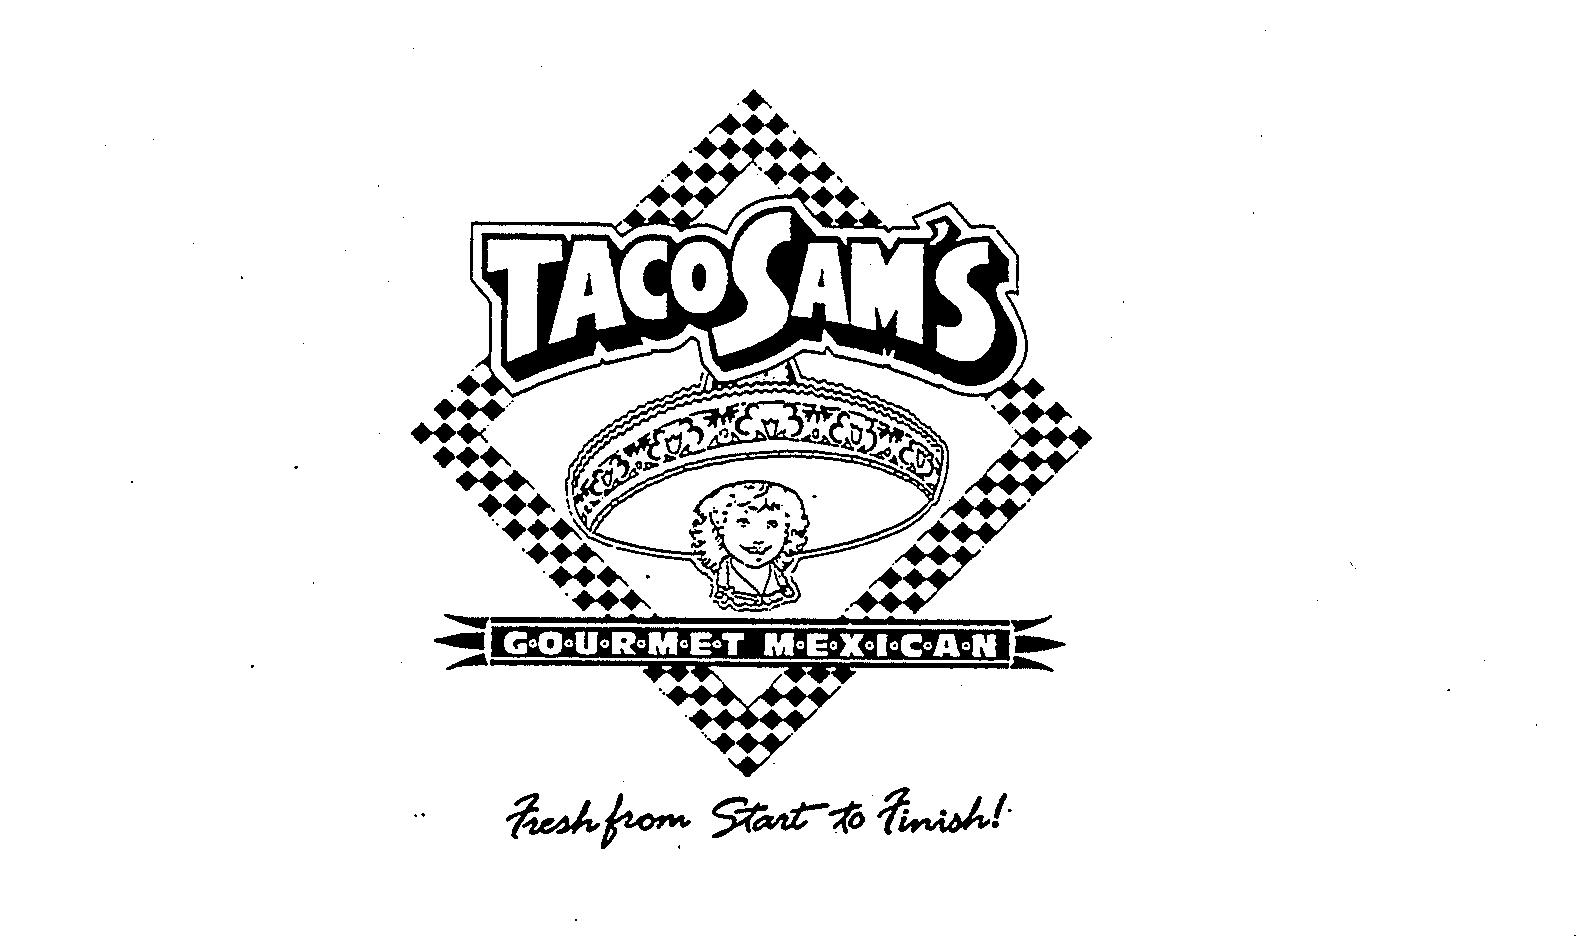  TACOSAM'S GOURMET MEXICAN FRESH FROM START TO FINISH!